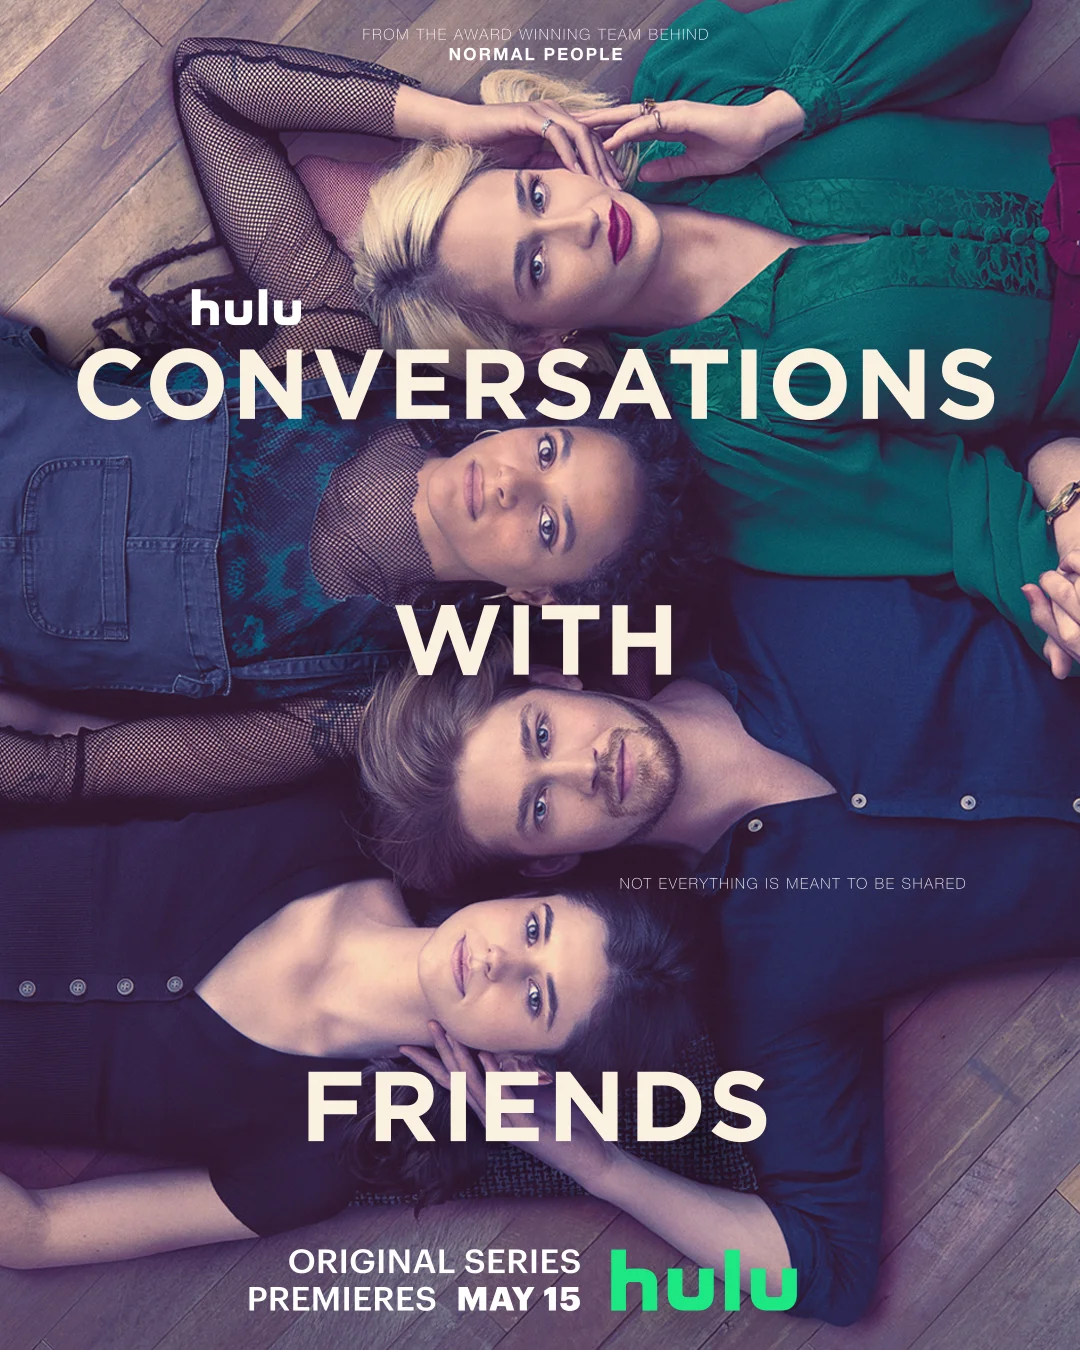 "Conversations with Friends‎" released official trailer and poster, it will be launched on Hulu on May 15